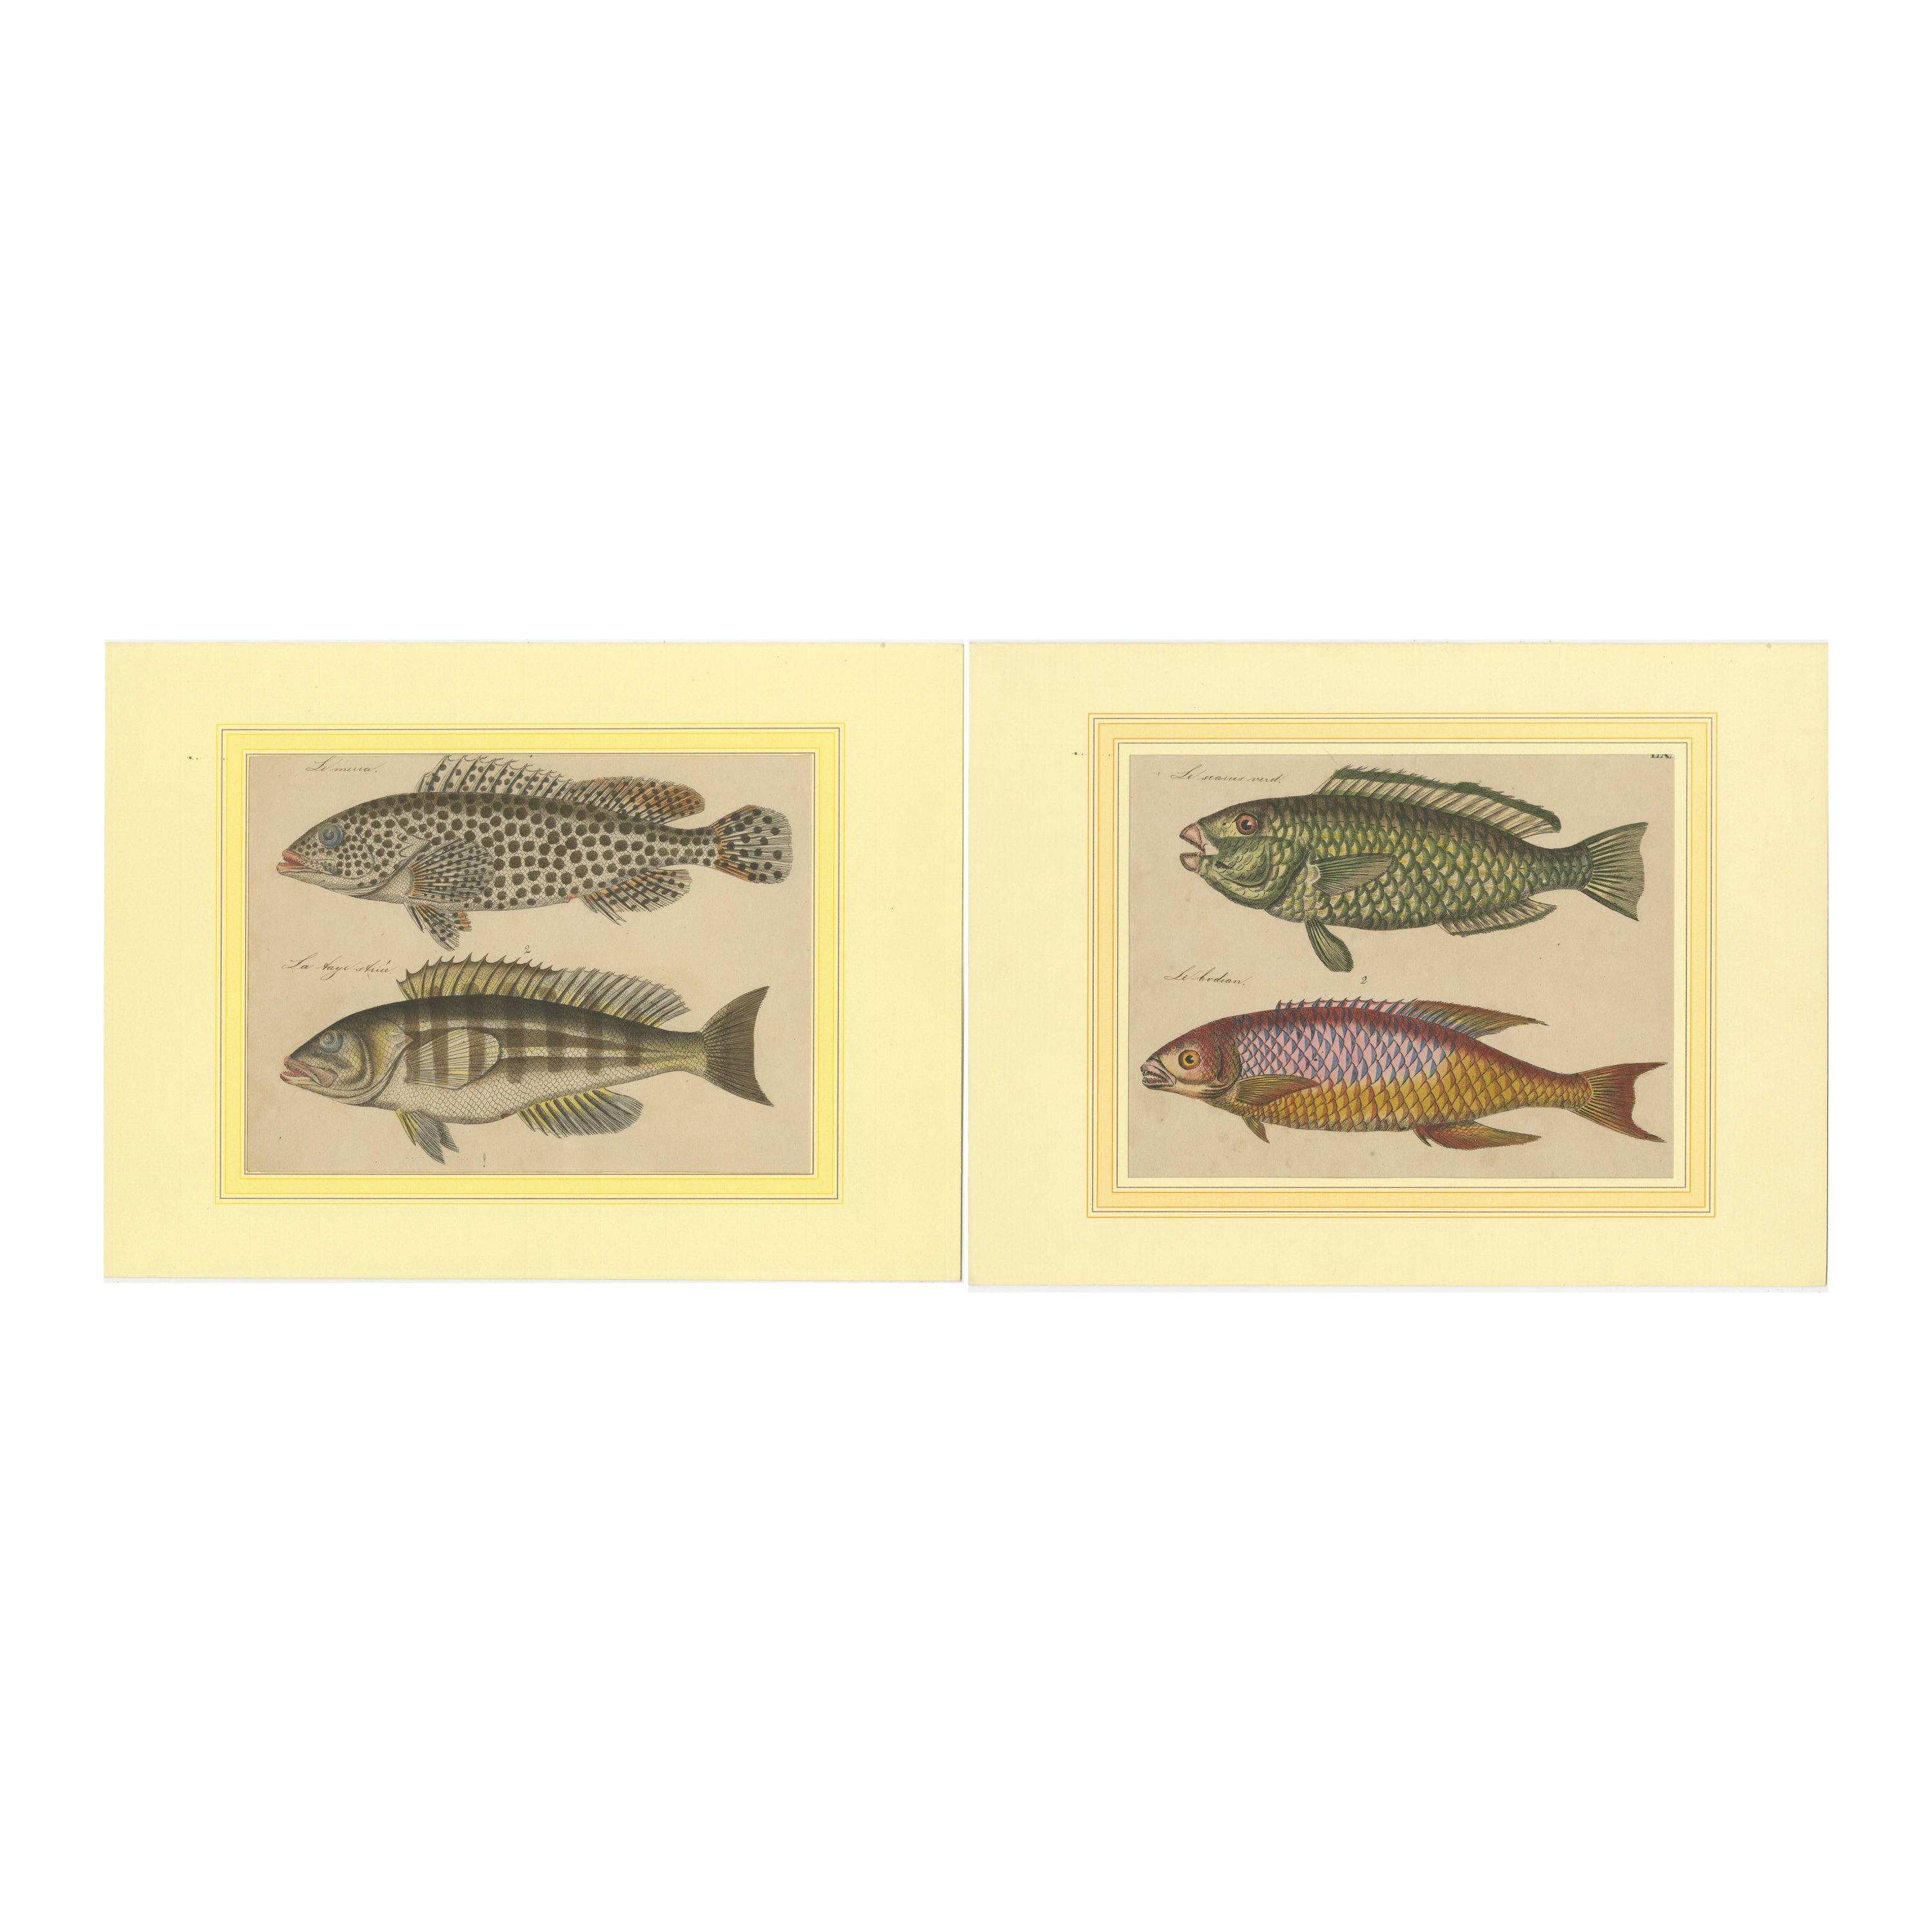 1819 Marine Splendor: Original Hand-Colored Engravings of Fishes For Sale